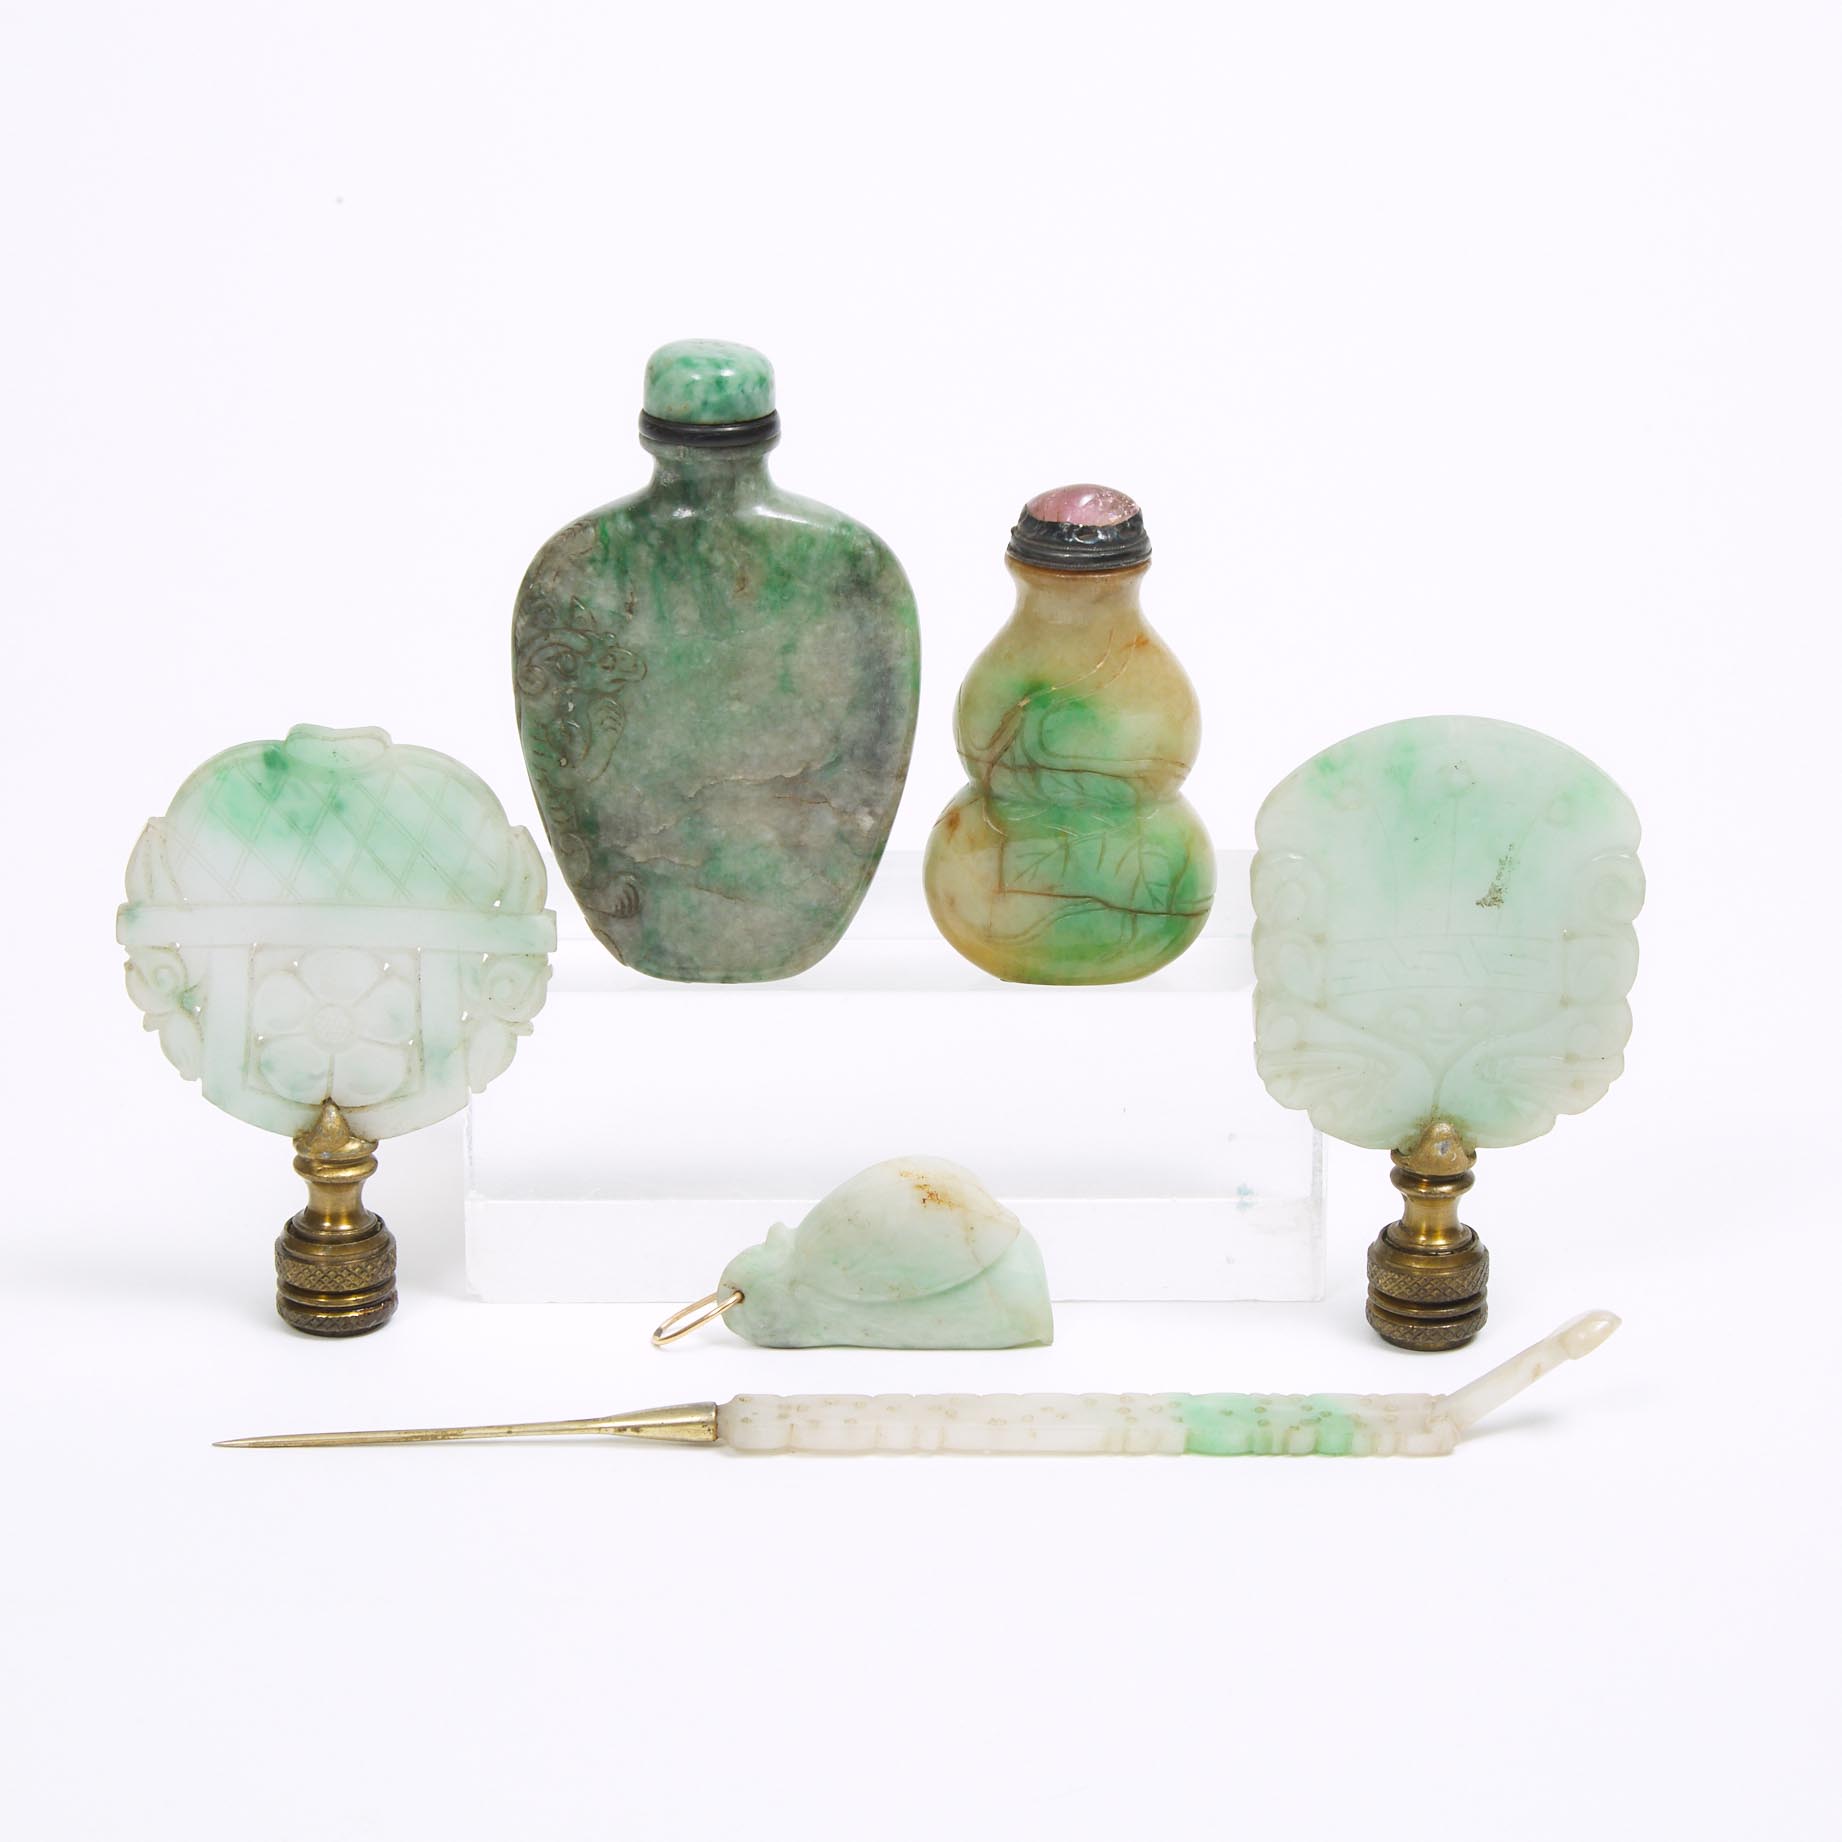 Two Jadeite Snuff Bottles, together with Four Jadeite Carvings, Qing Dynasty